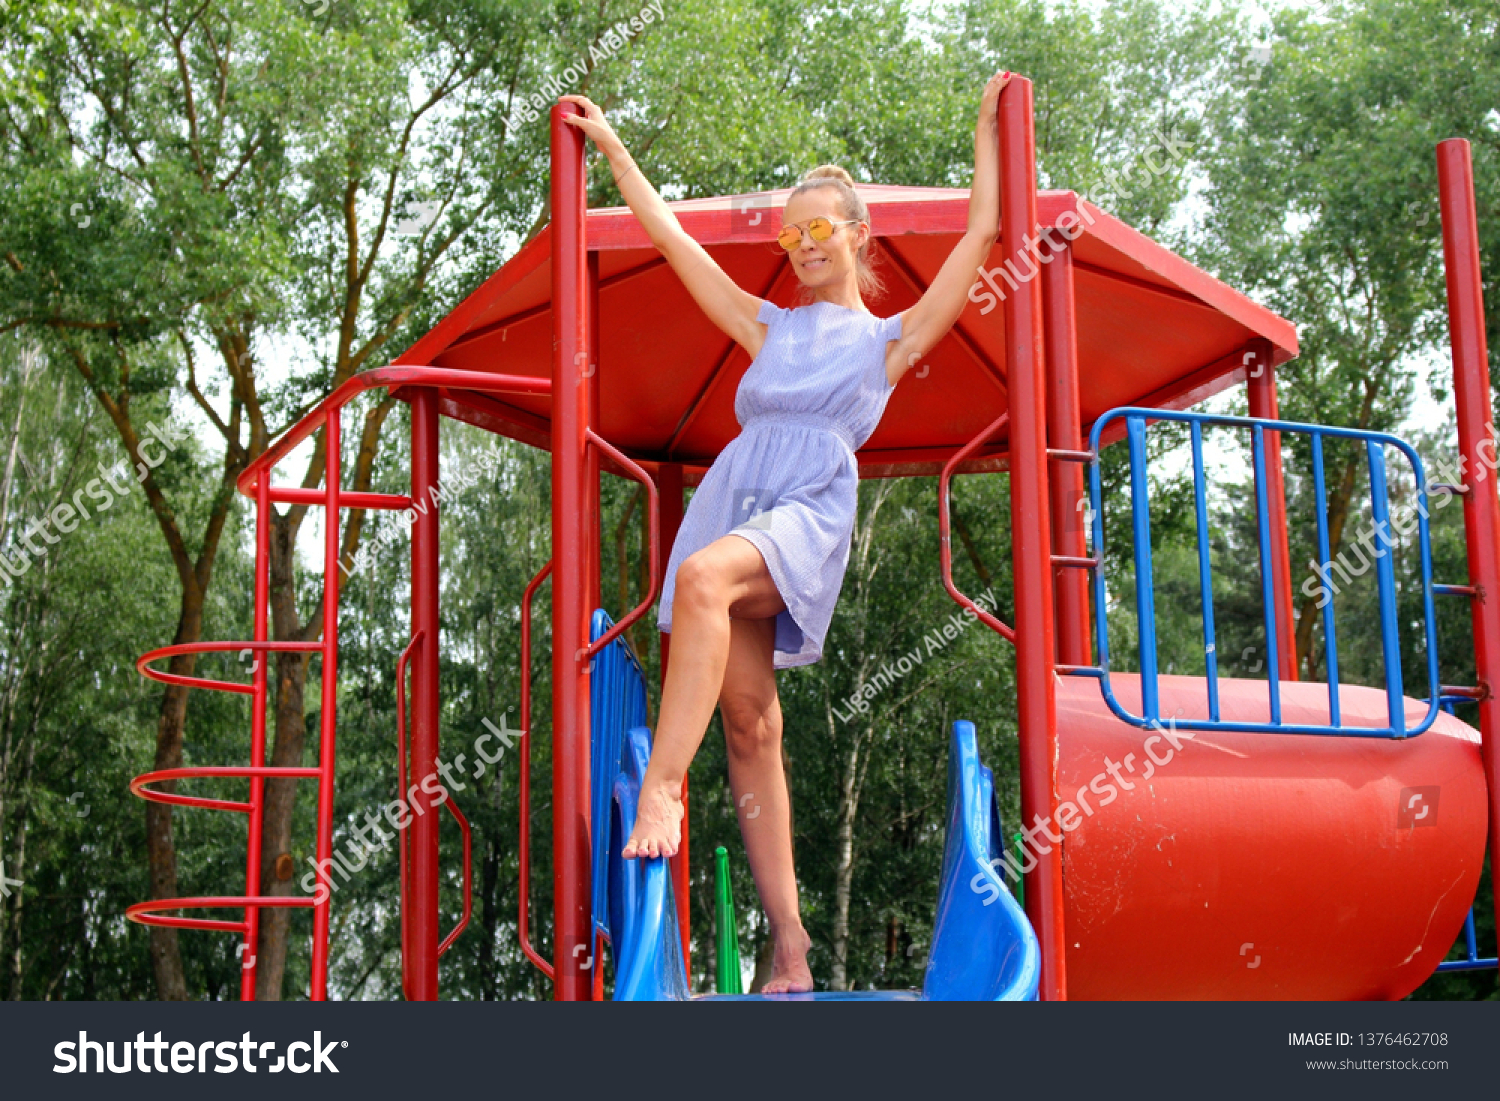 https://image.shutterstock.com/shutterstock/photos/1376462708/display_1500/stock-photo-adult-girl-on-the-playground-climbed-an-iron-slide-on-the-background-of-trees-1376462708.jpg